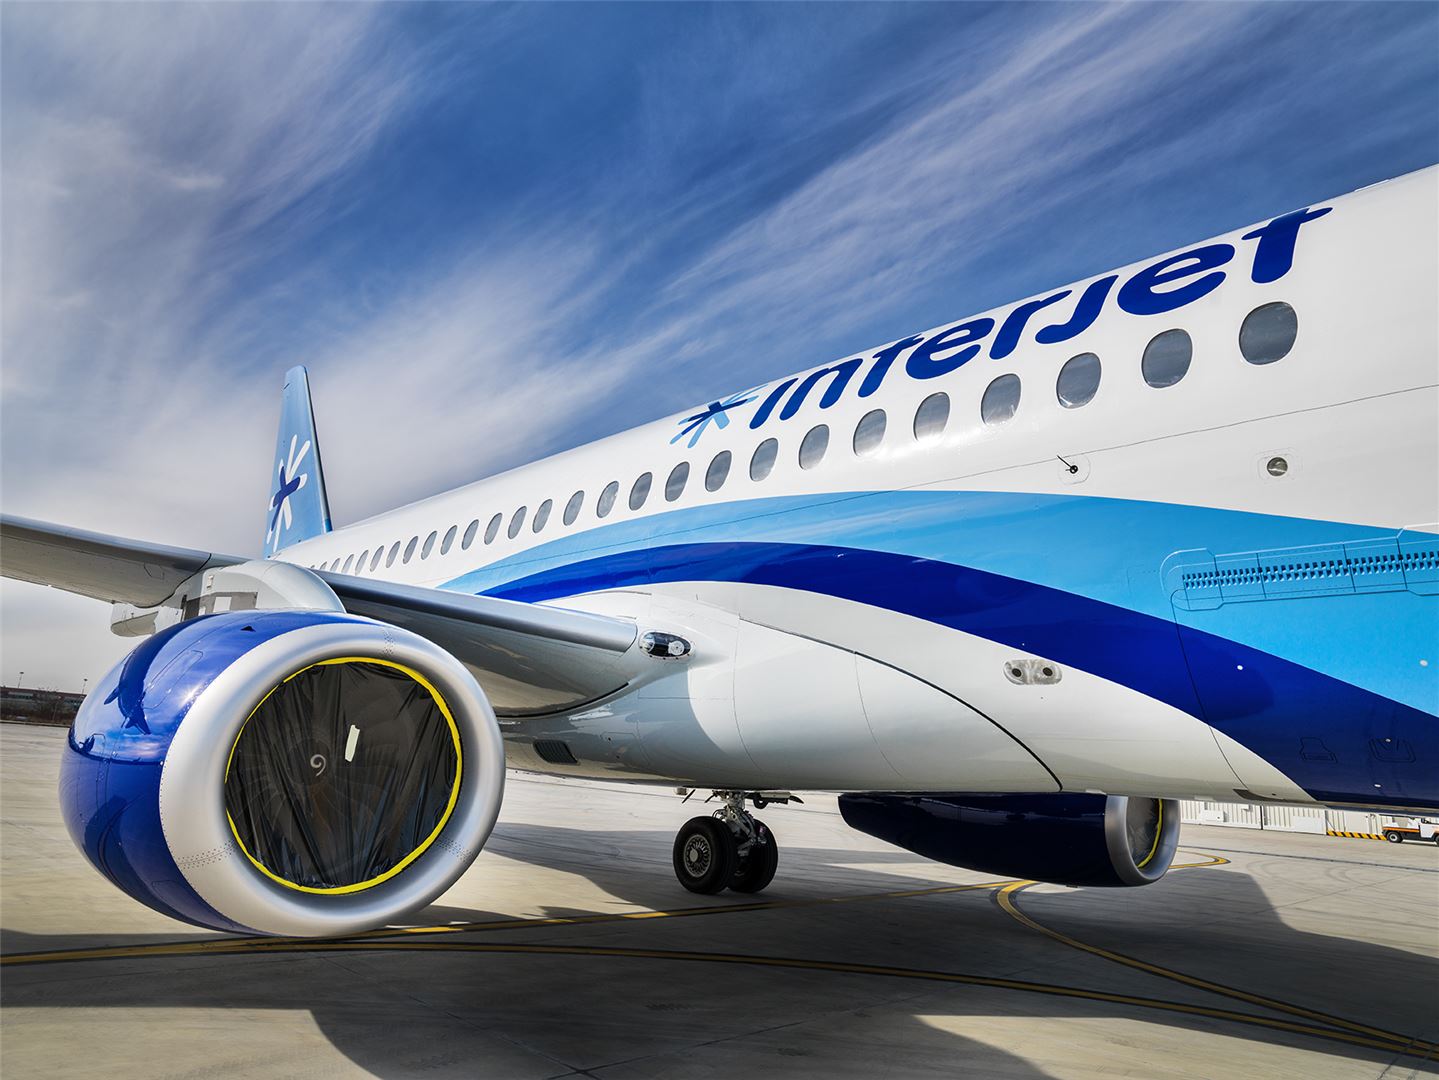 New Vancouver-Mexico Air Service From Interjet Launching In October